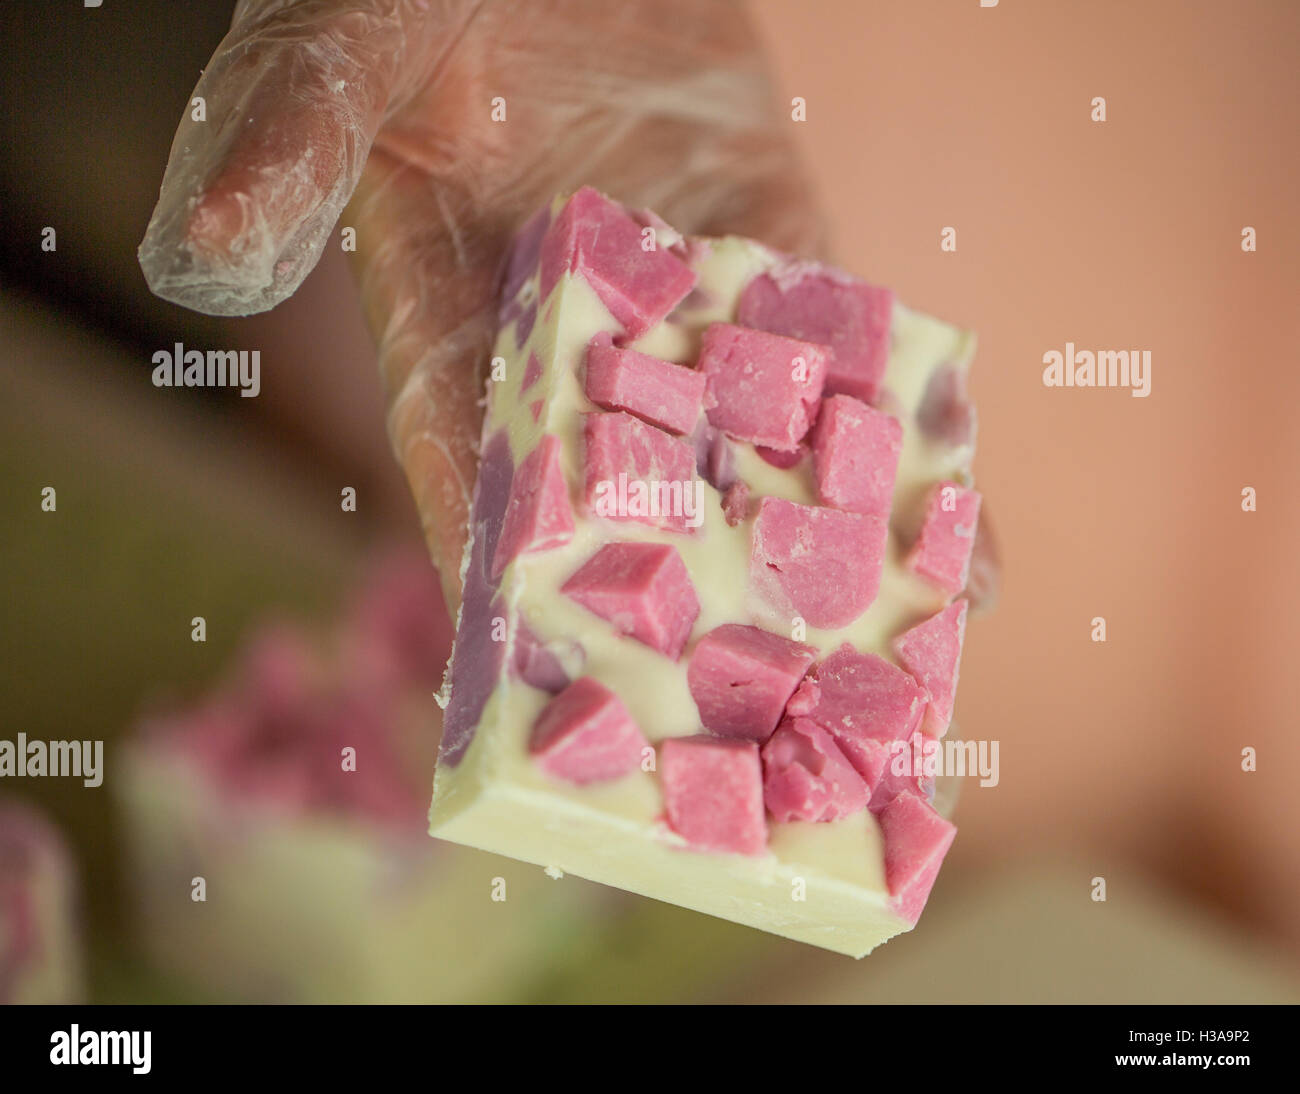 A Finished Bar Of Homemade Soap Stock Photo